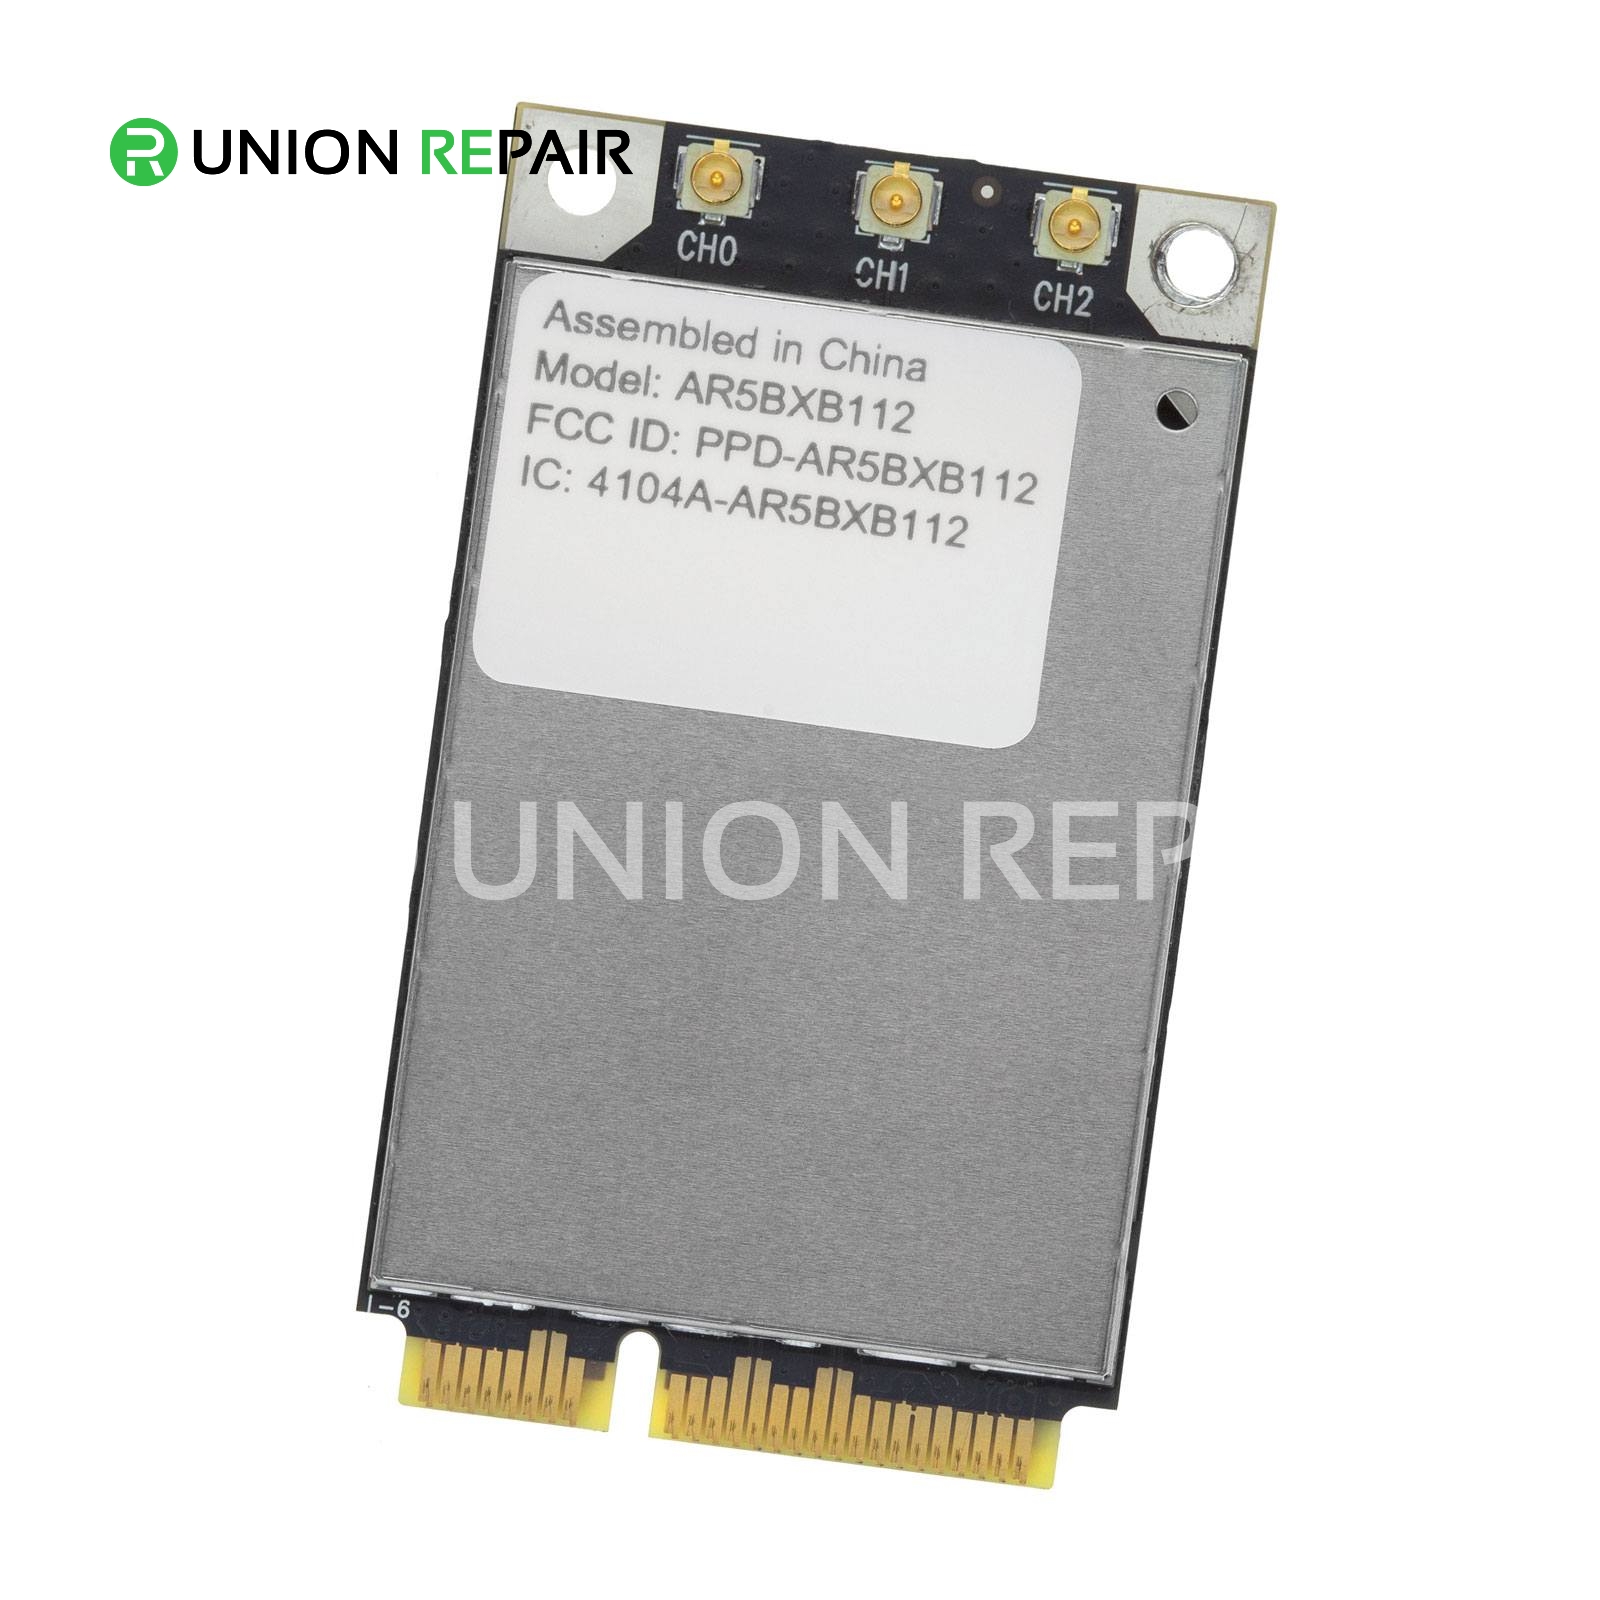 AirPort Wireless Network Card for iMac 21.5" A1311 (Late 2011) #AR5BXB112